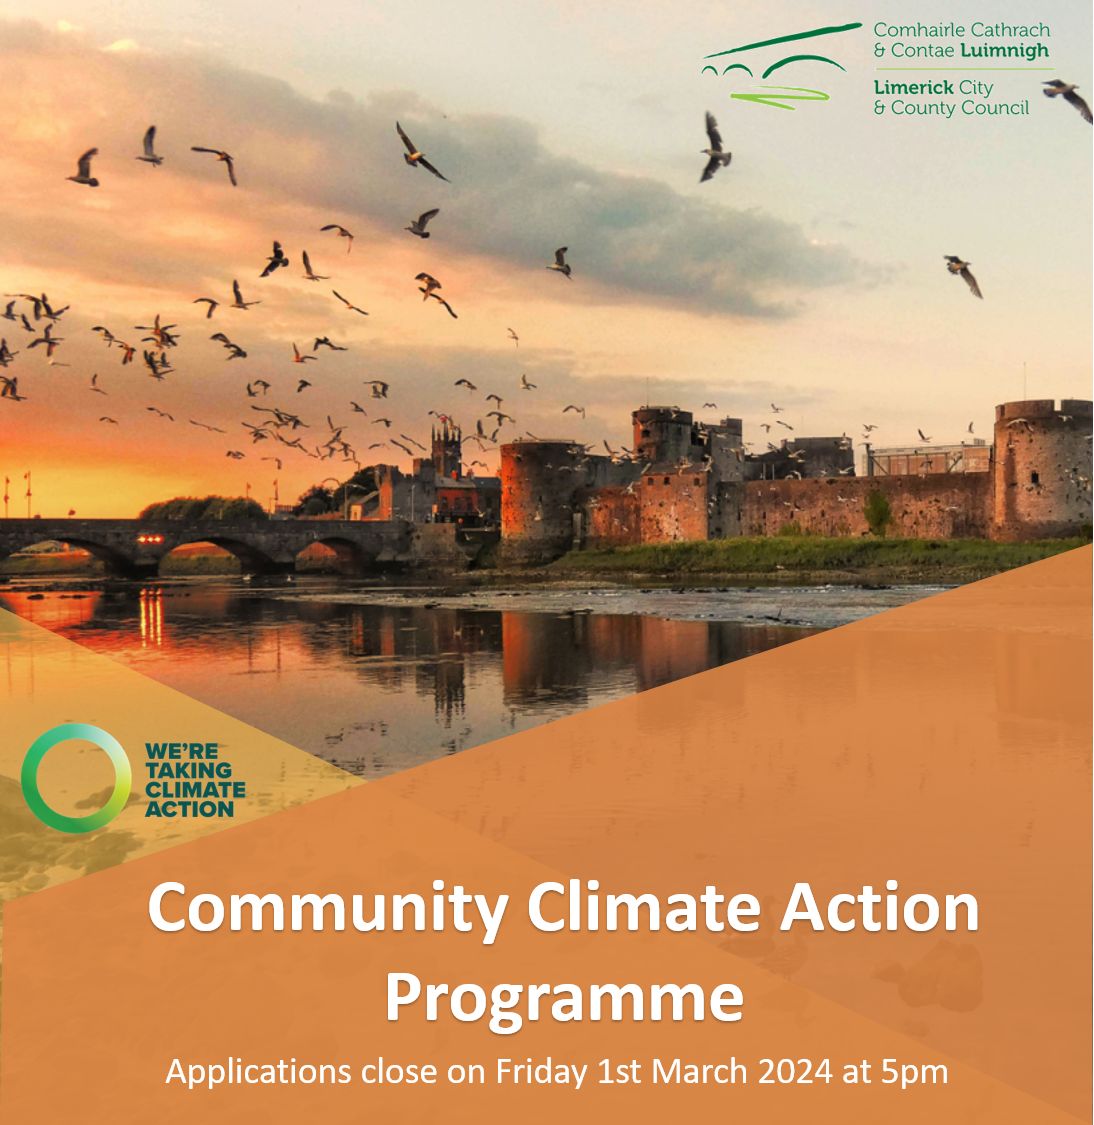 ONE week left to apply for @Limerick_ie Community Climate Action Programme (#CCAP), You can apply for up to €100,000 for your project, which is 100% funded. More Information and applications can be found at mypoint.limerick.ie/en/applications #Community #Energy #Biodiversity #Limerick